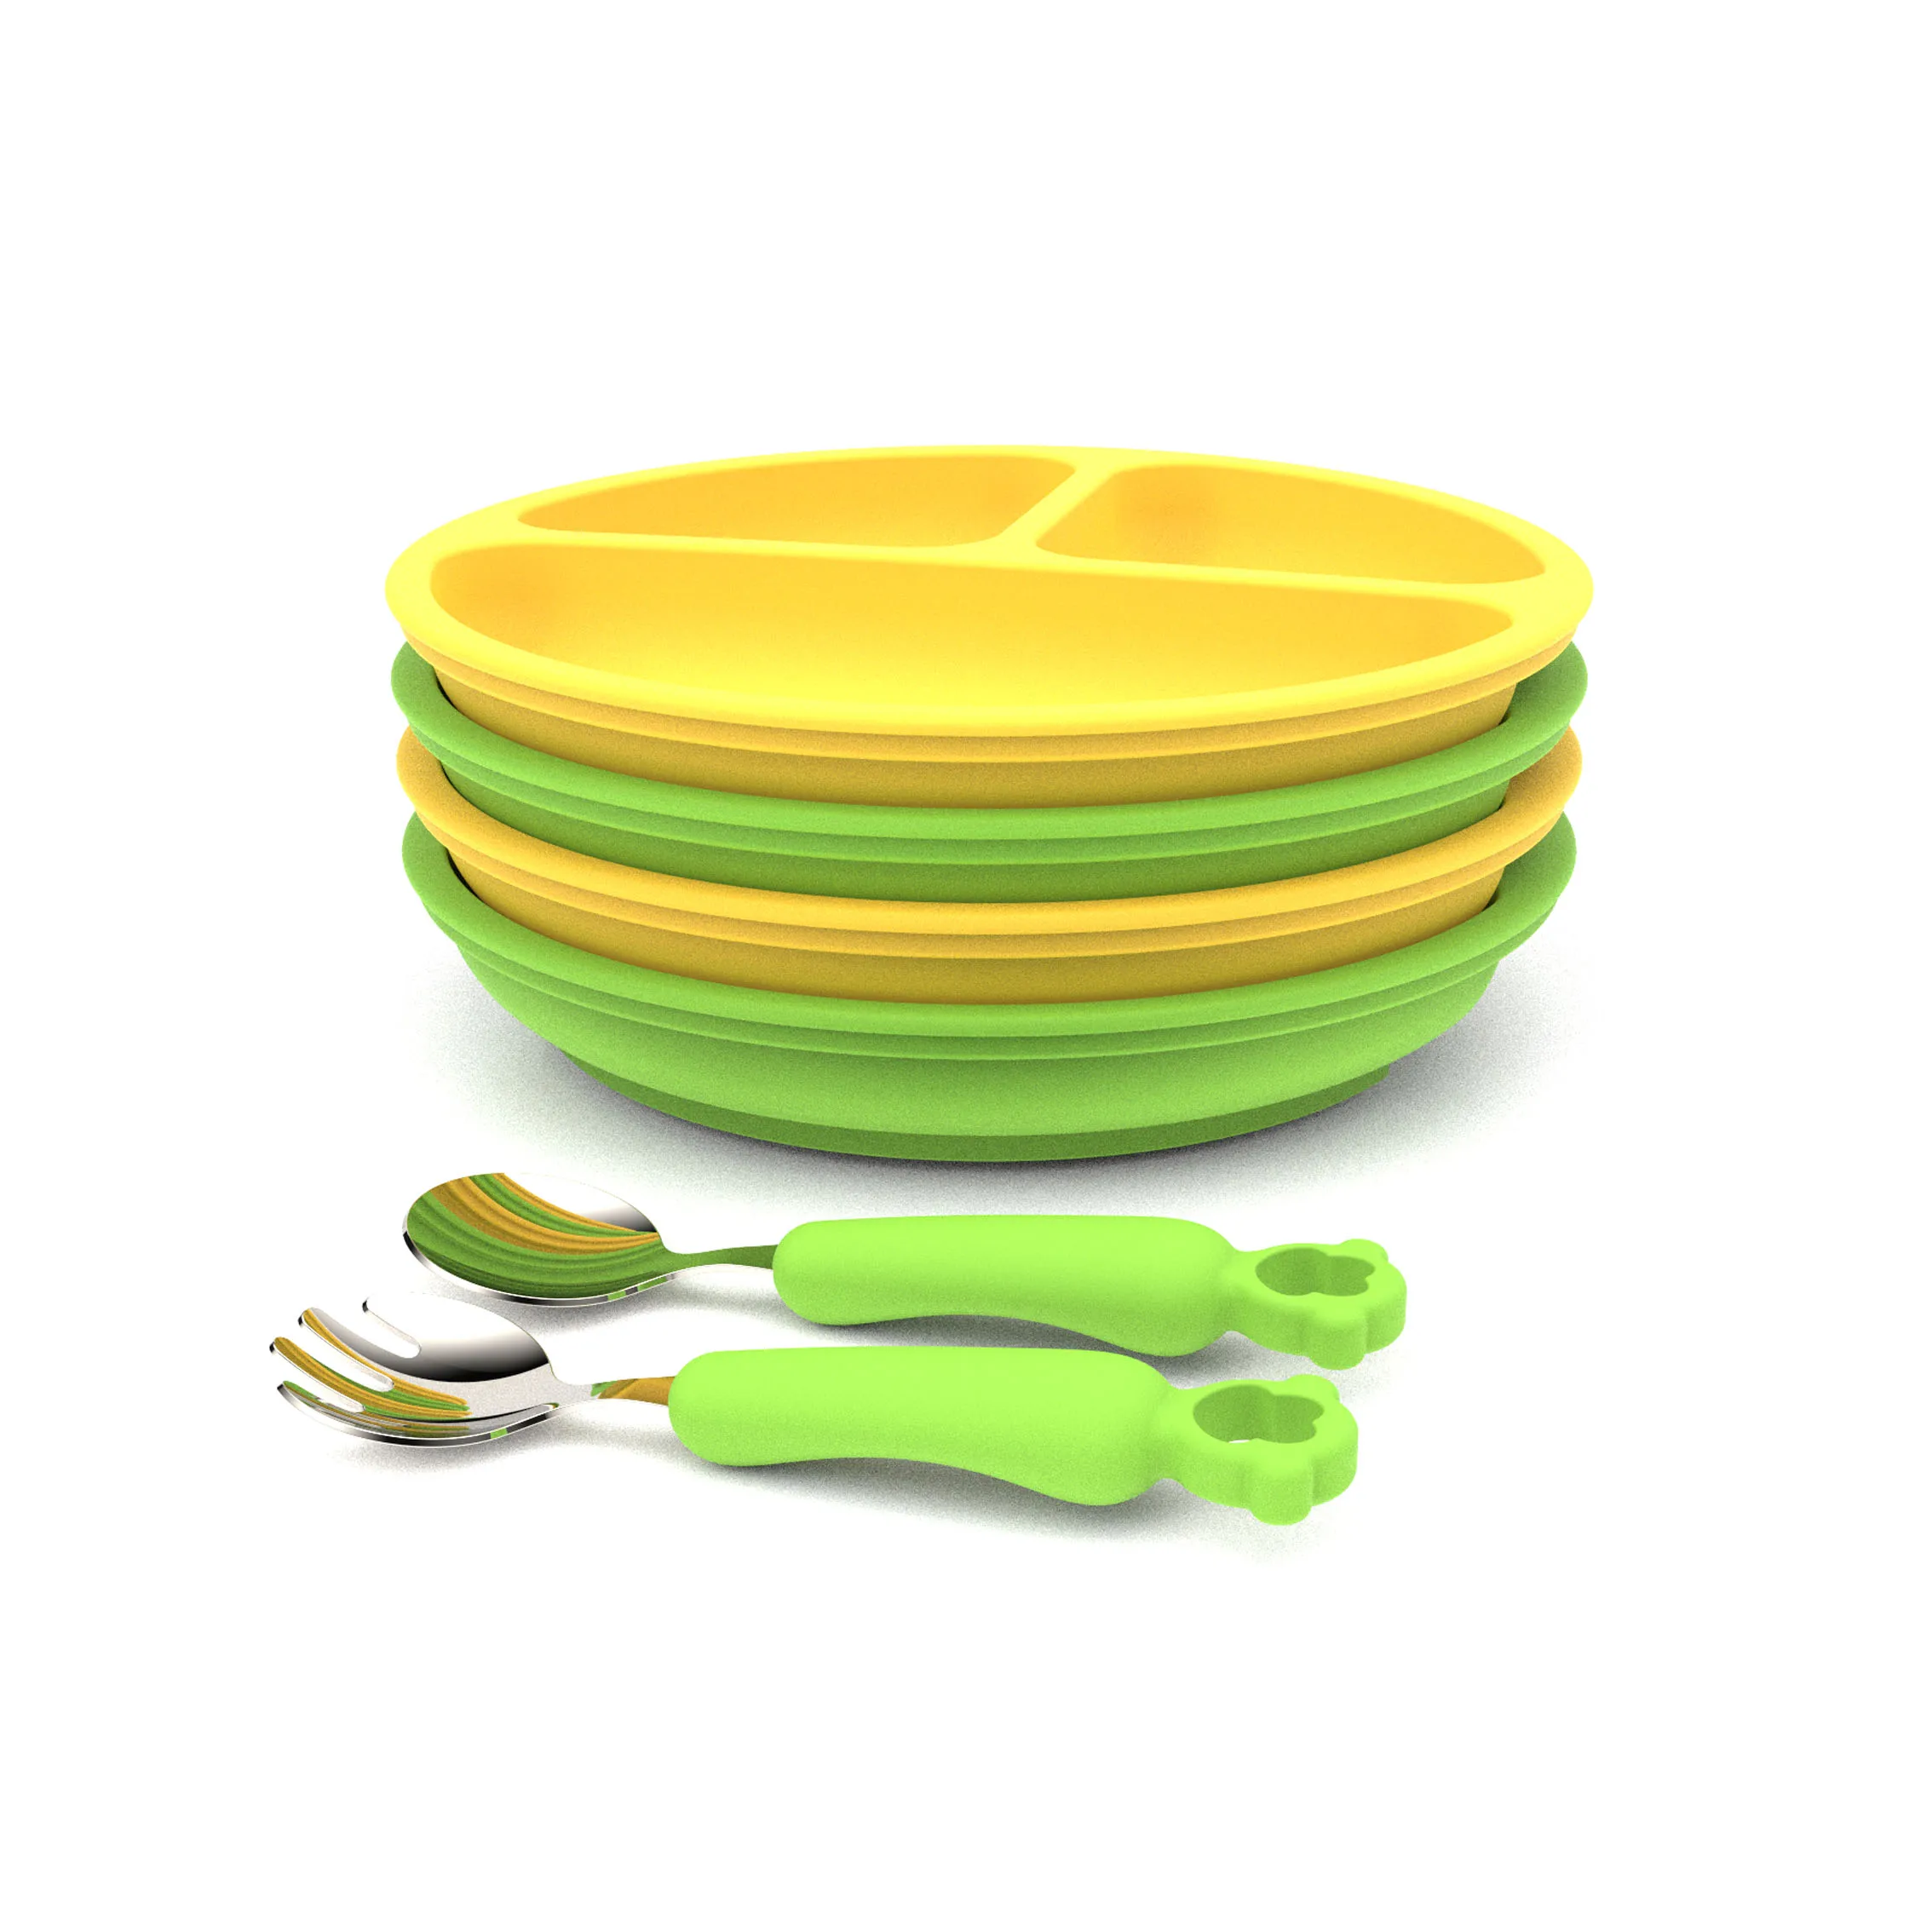 Wholesale Bpa Free Kids Tableware Food Plate Mat Baby Bowl Silicone Feeding Set With Box